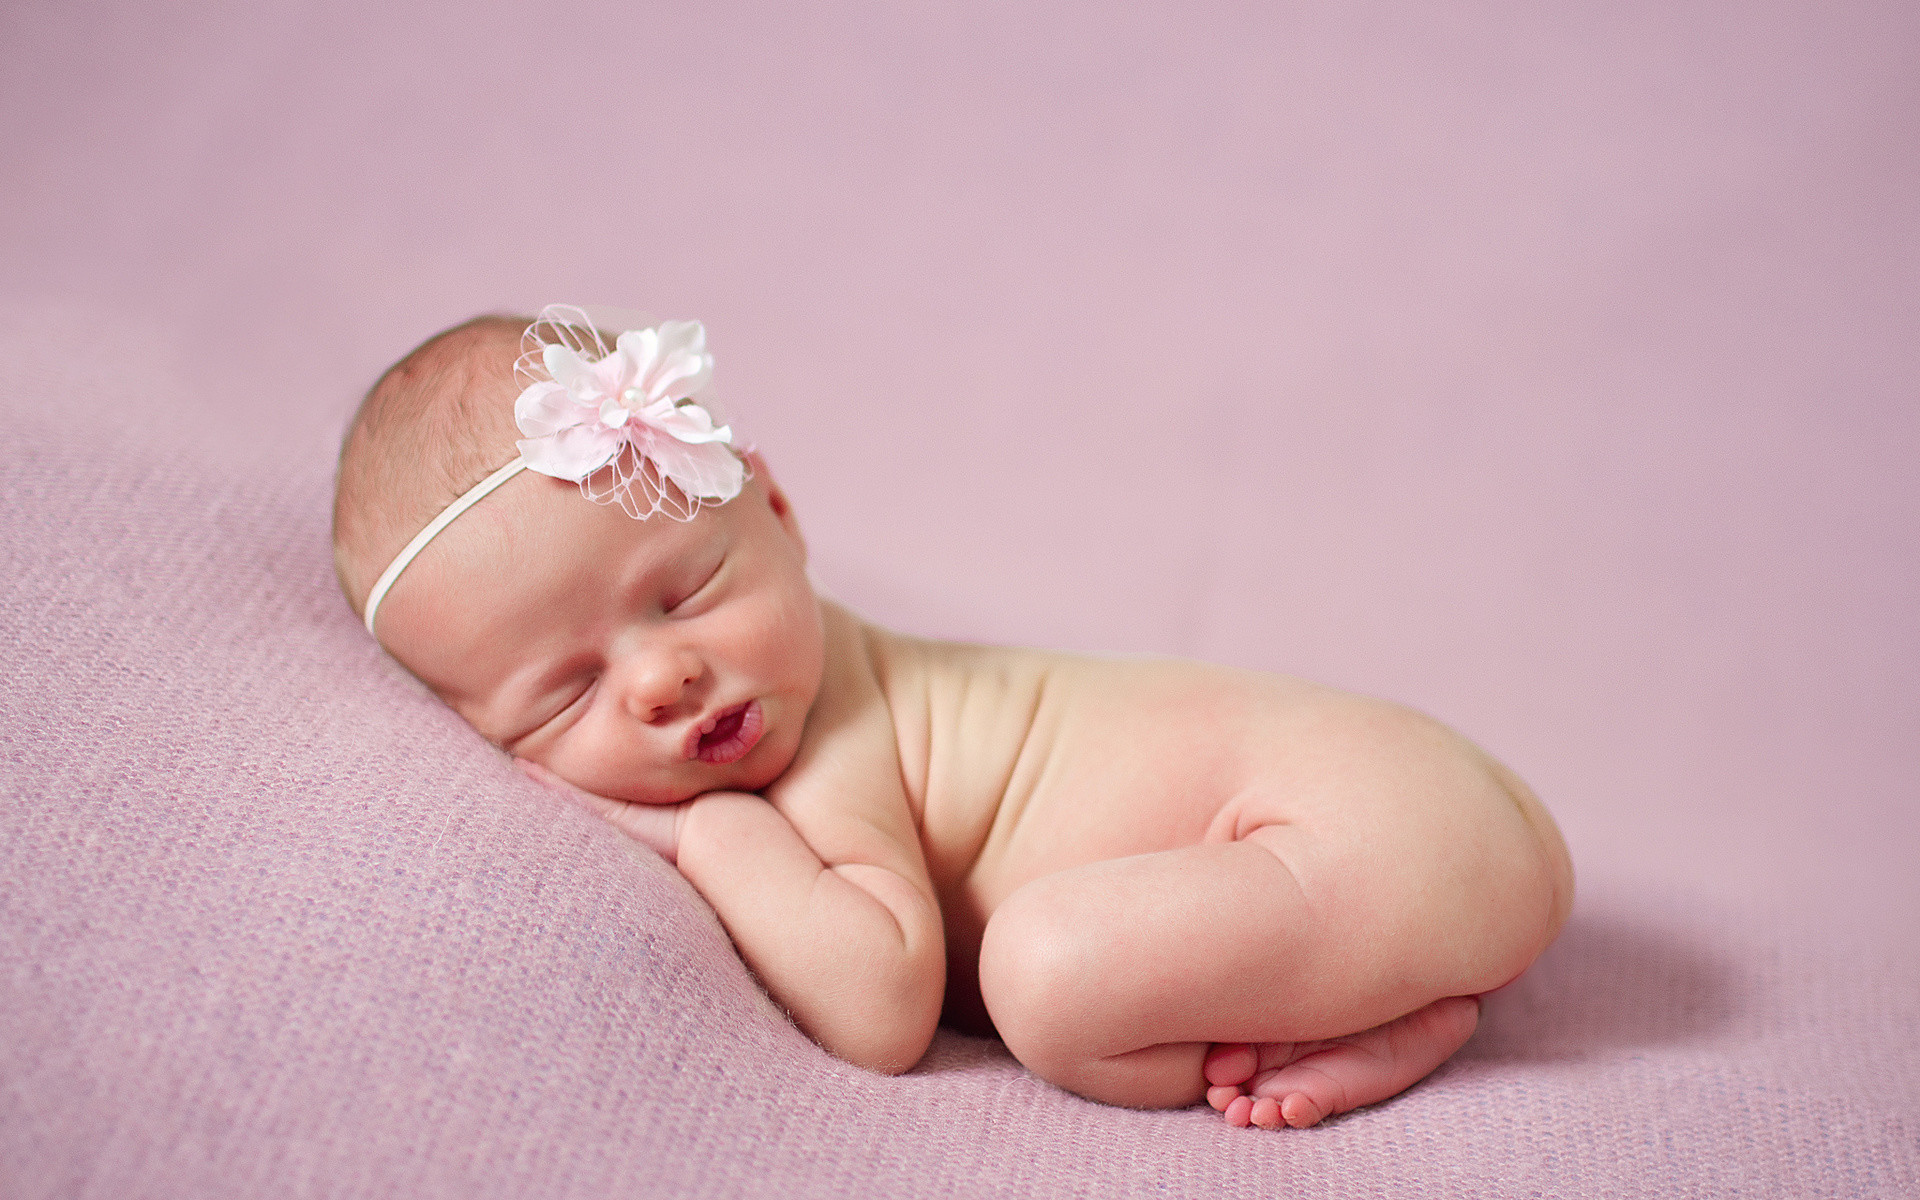 1920x1200 59-infant-baby-picture-sleeping-baby-wallpaper-cute-